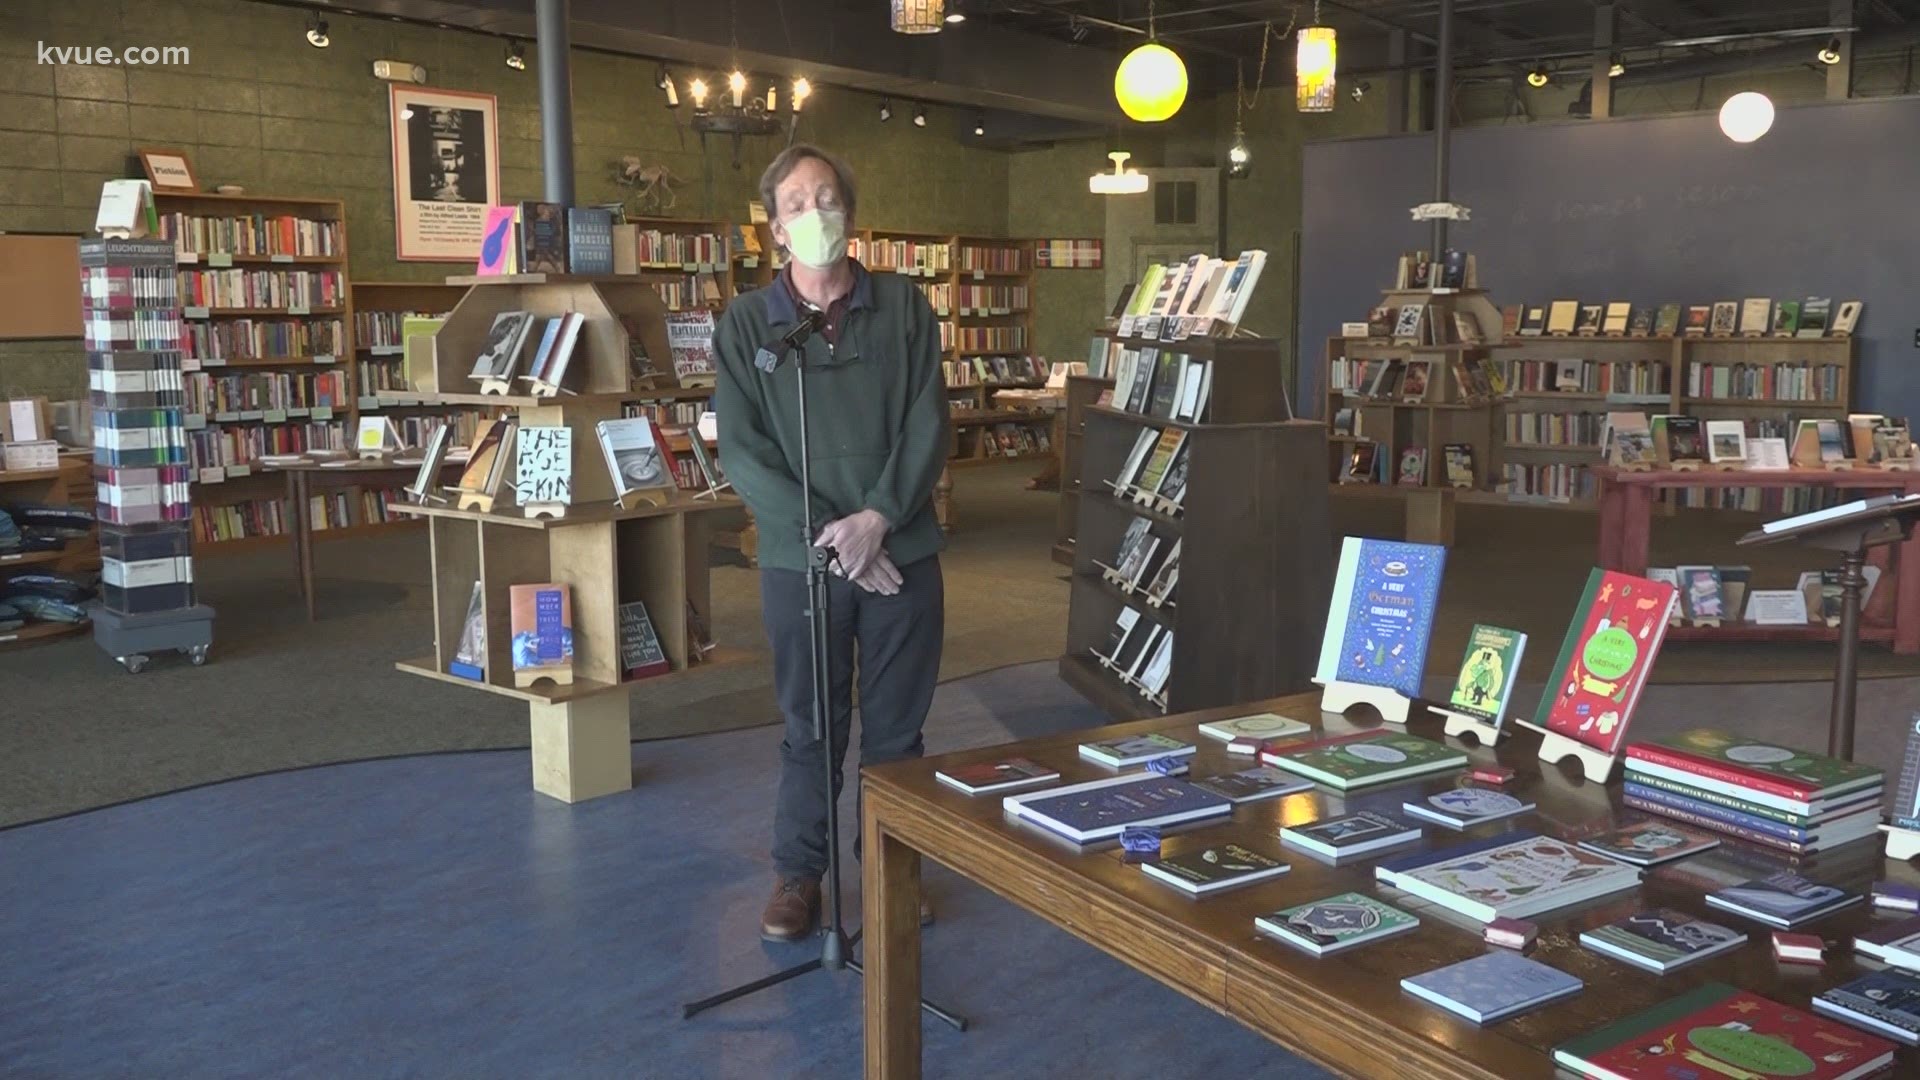 Among the businesses that have been struggling since March is bookstores. Luis de Leon shows how some local shops are making ends meet.